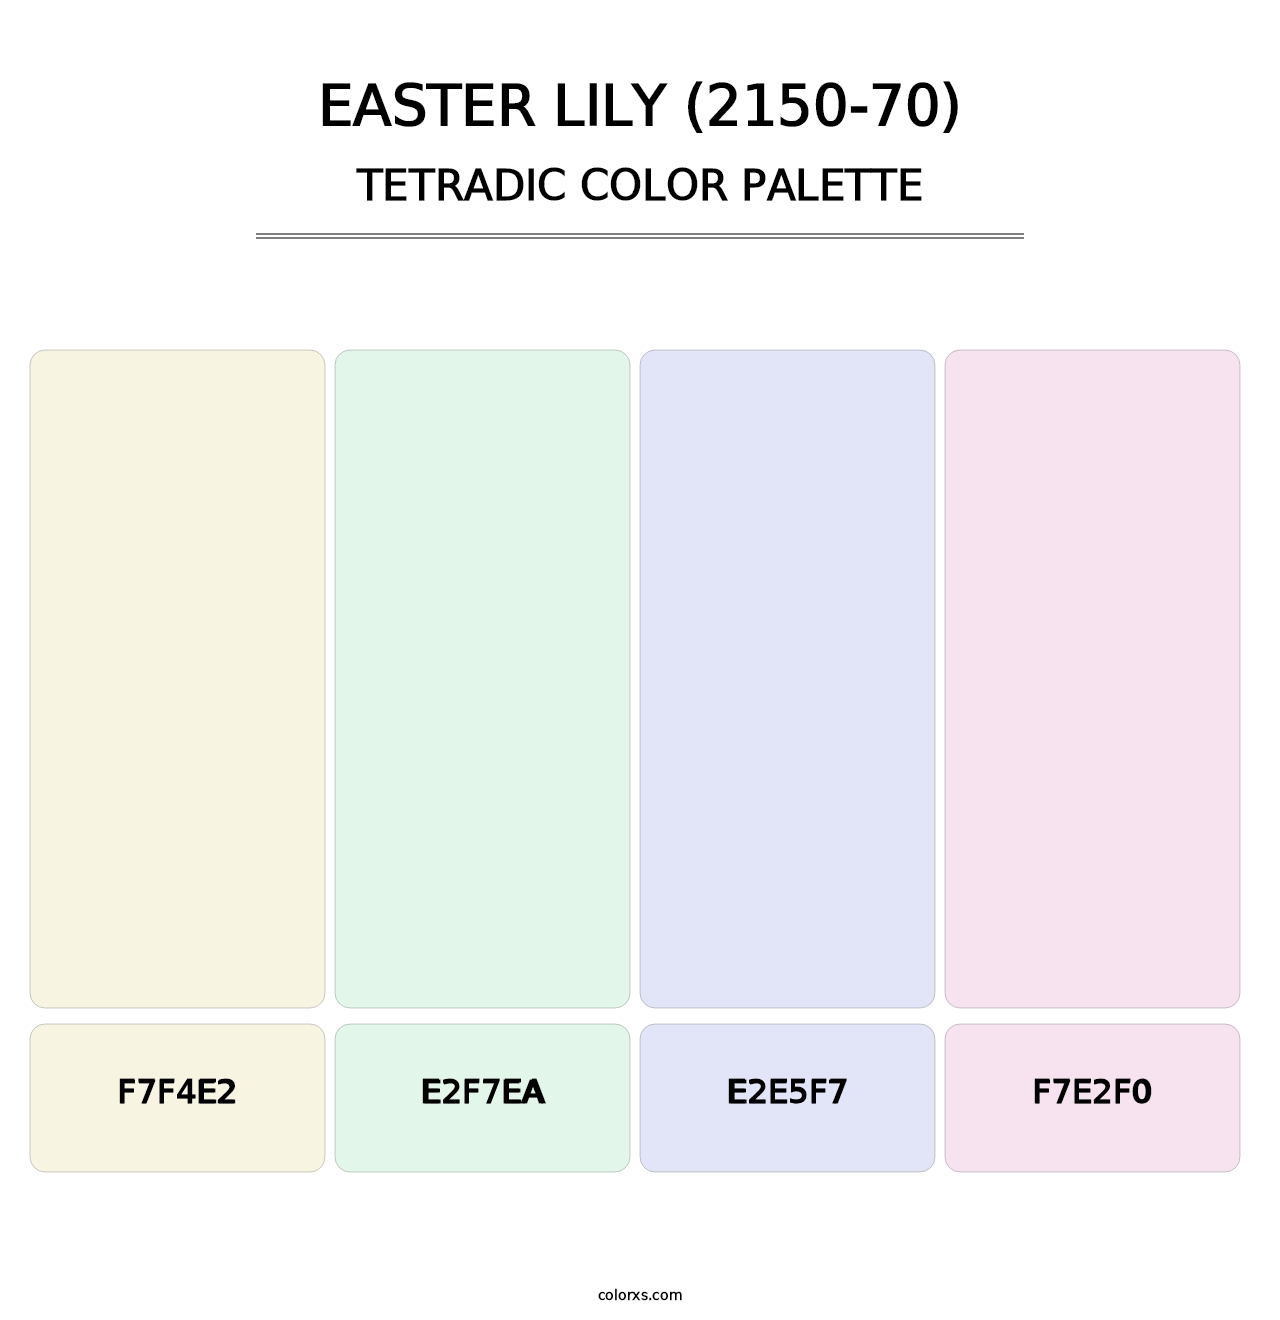 Easter Lily (2150-70) - Tetradic Color Palette